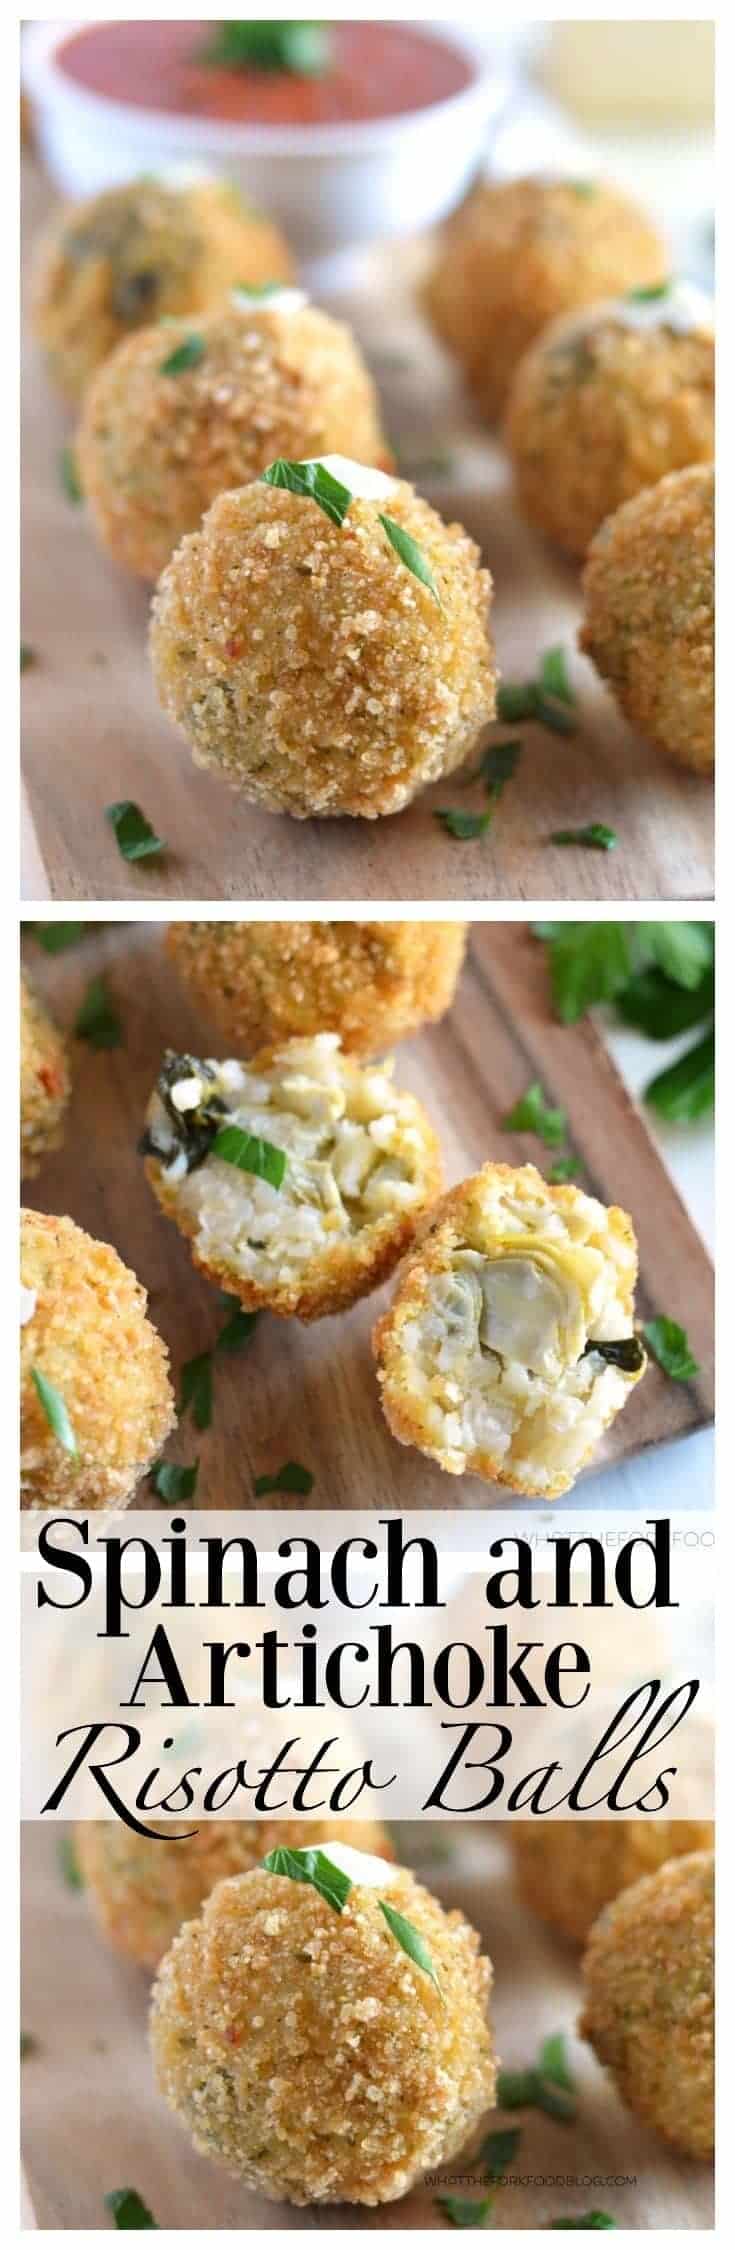 Crispy Fried Spinach and Artichoke Risotto Balls (gluten free) from What The Fork Food Blog | whattheforkfoodblog.com